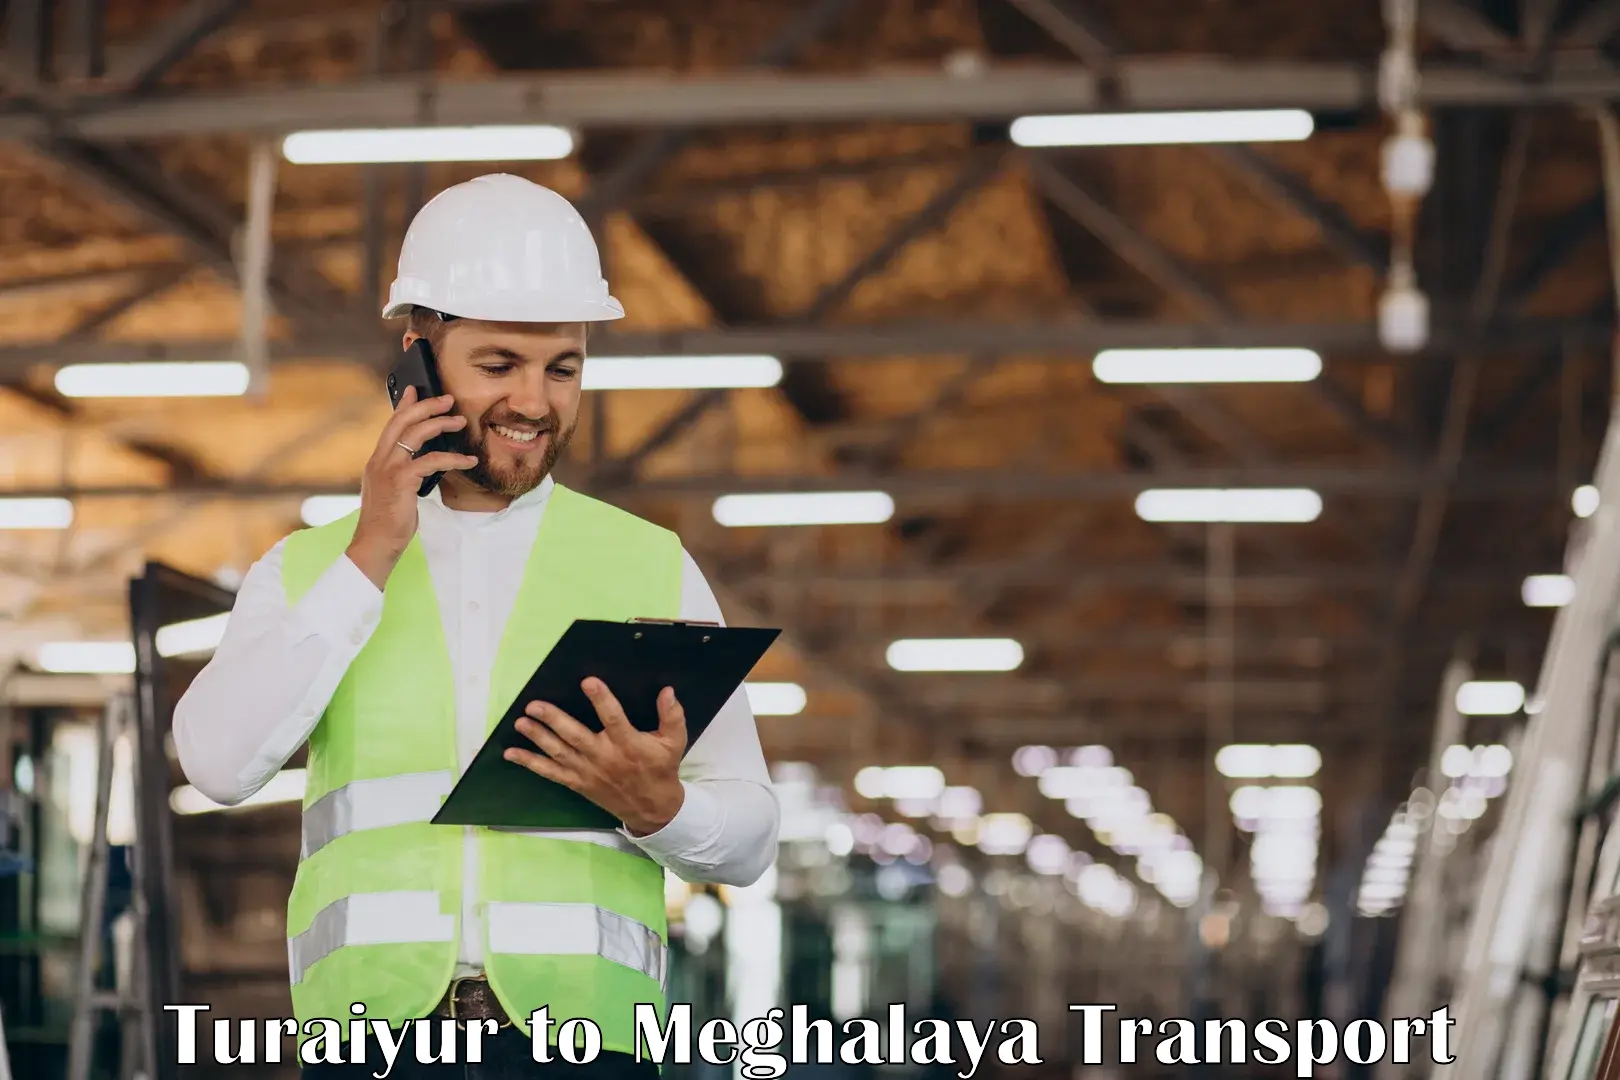 Commercial transport service Turaiyur to Meghalaya